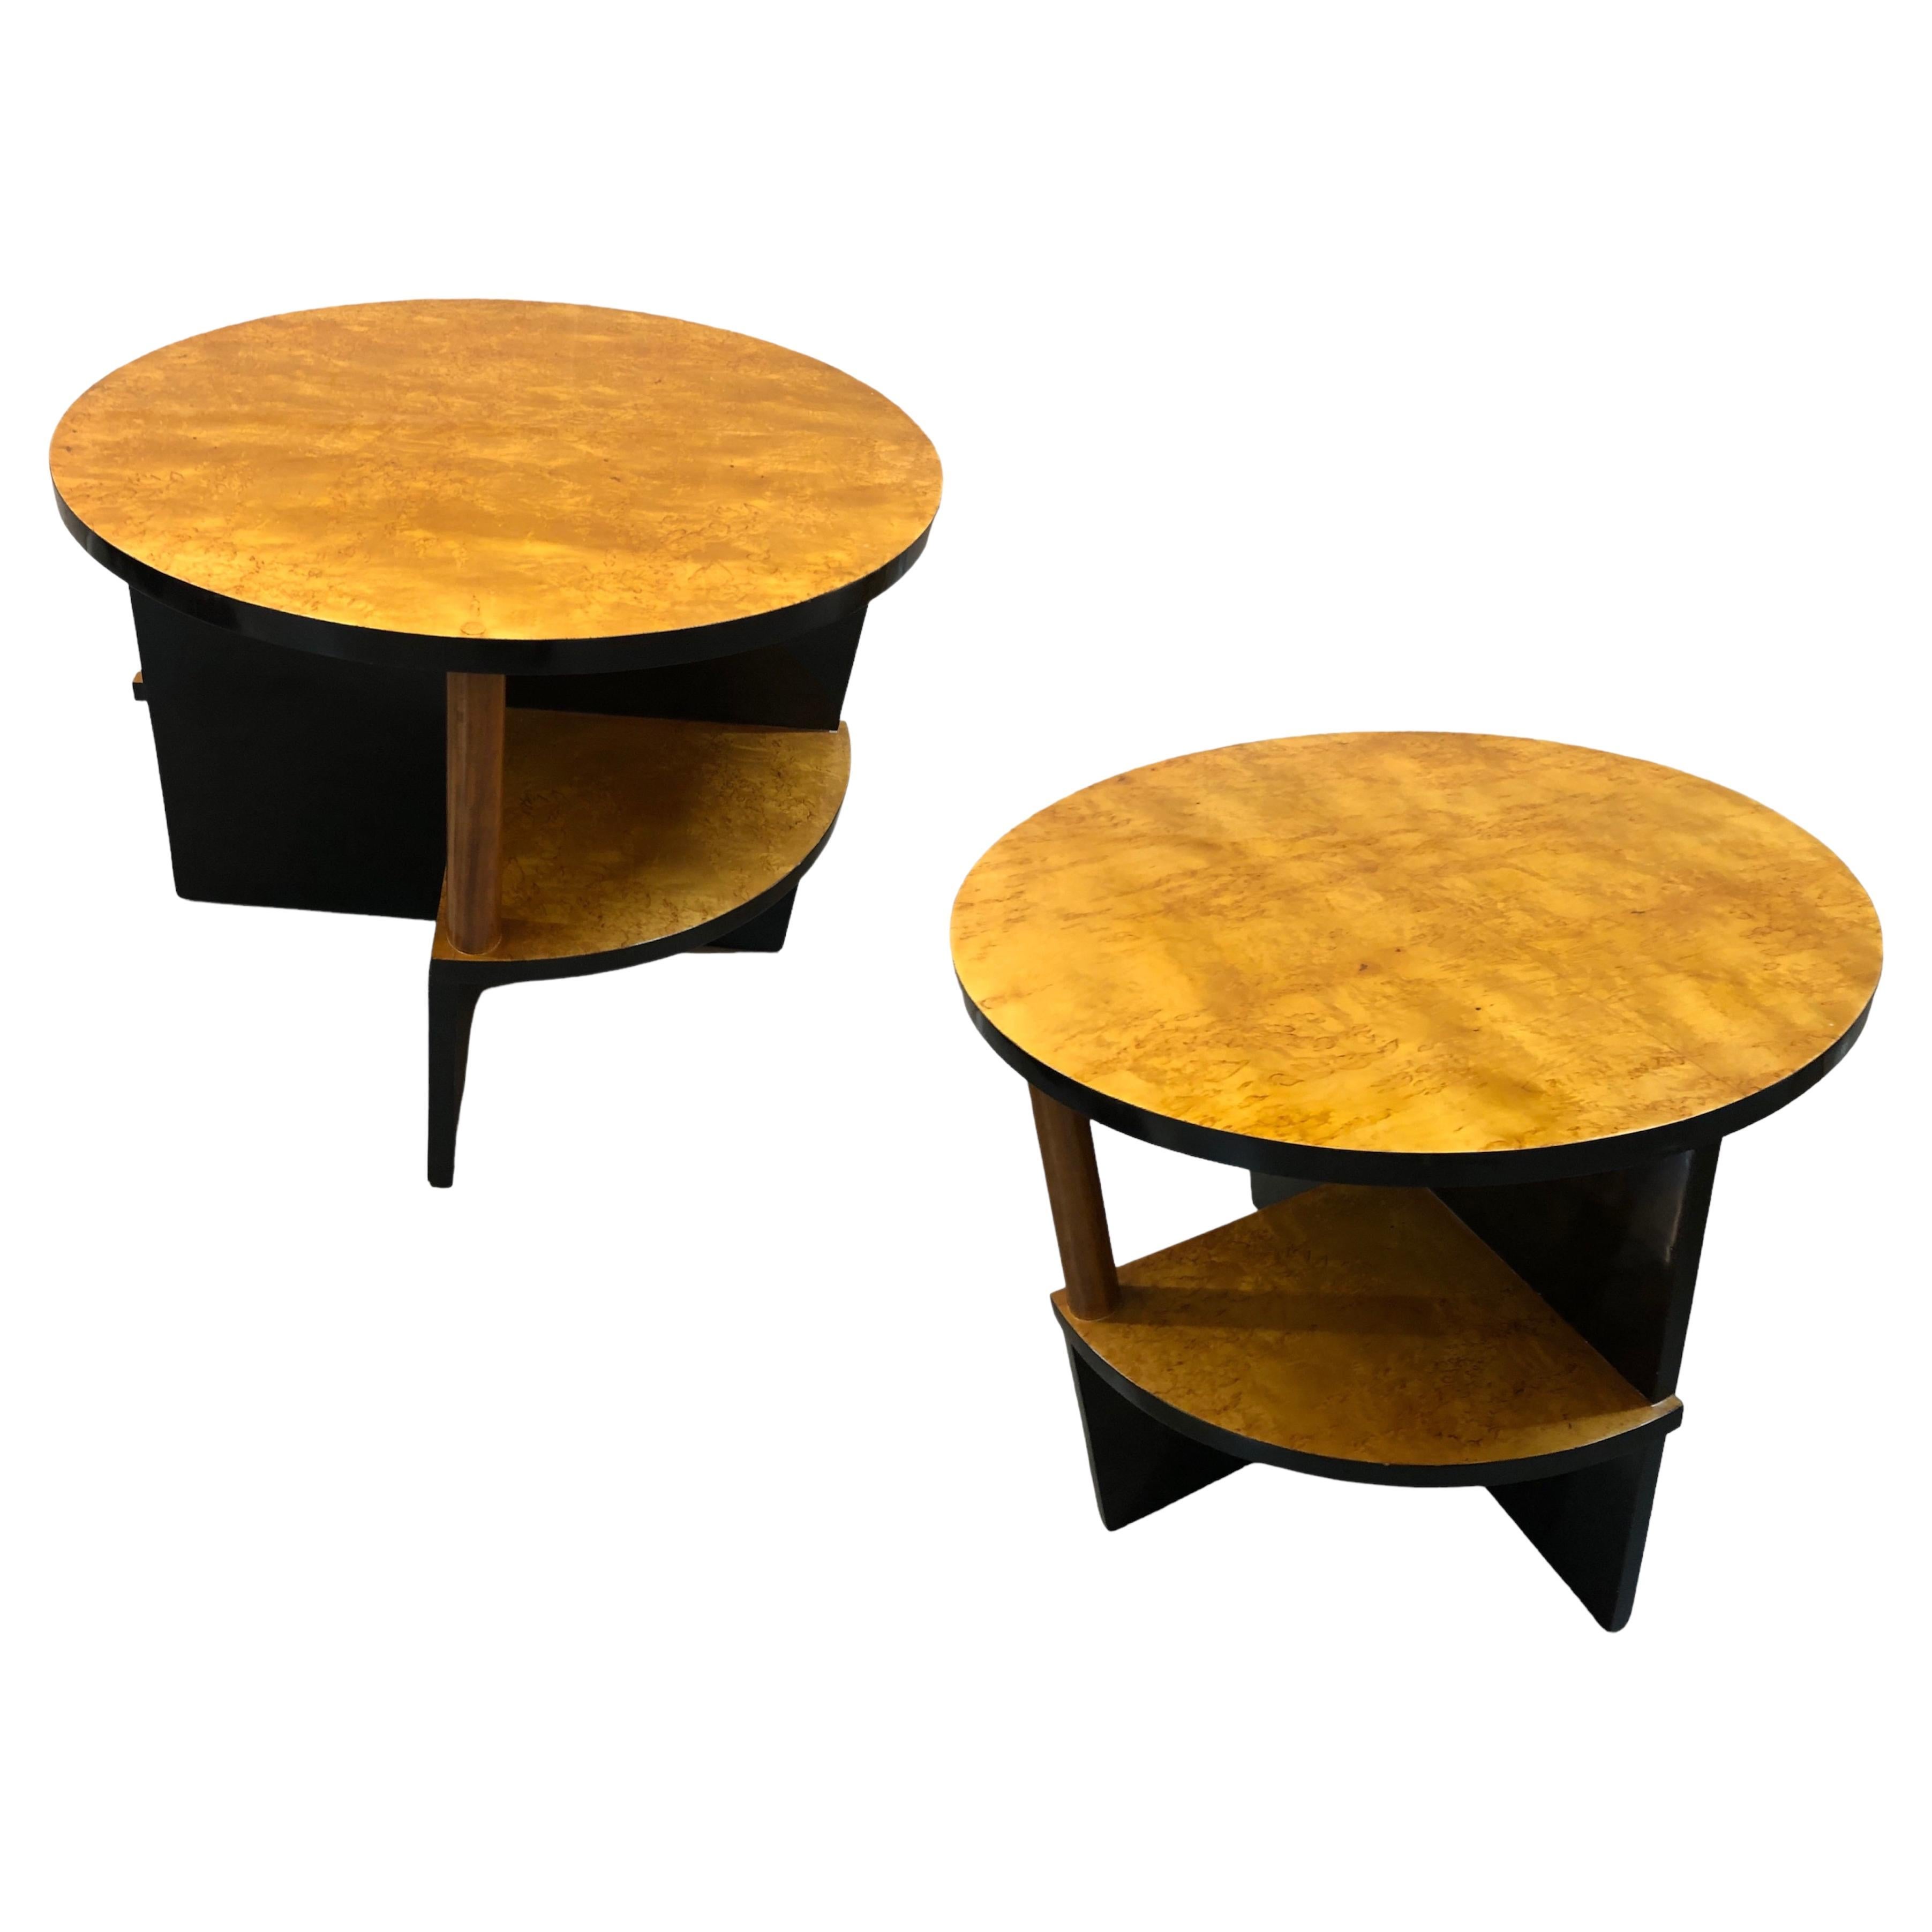 Amaizing Art Deco, 2 Tables in Wood, France, 1930